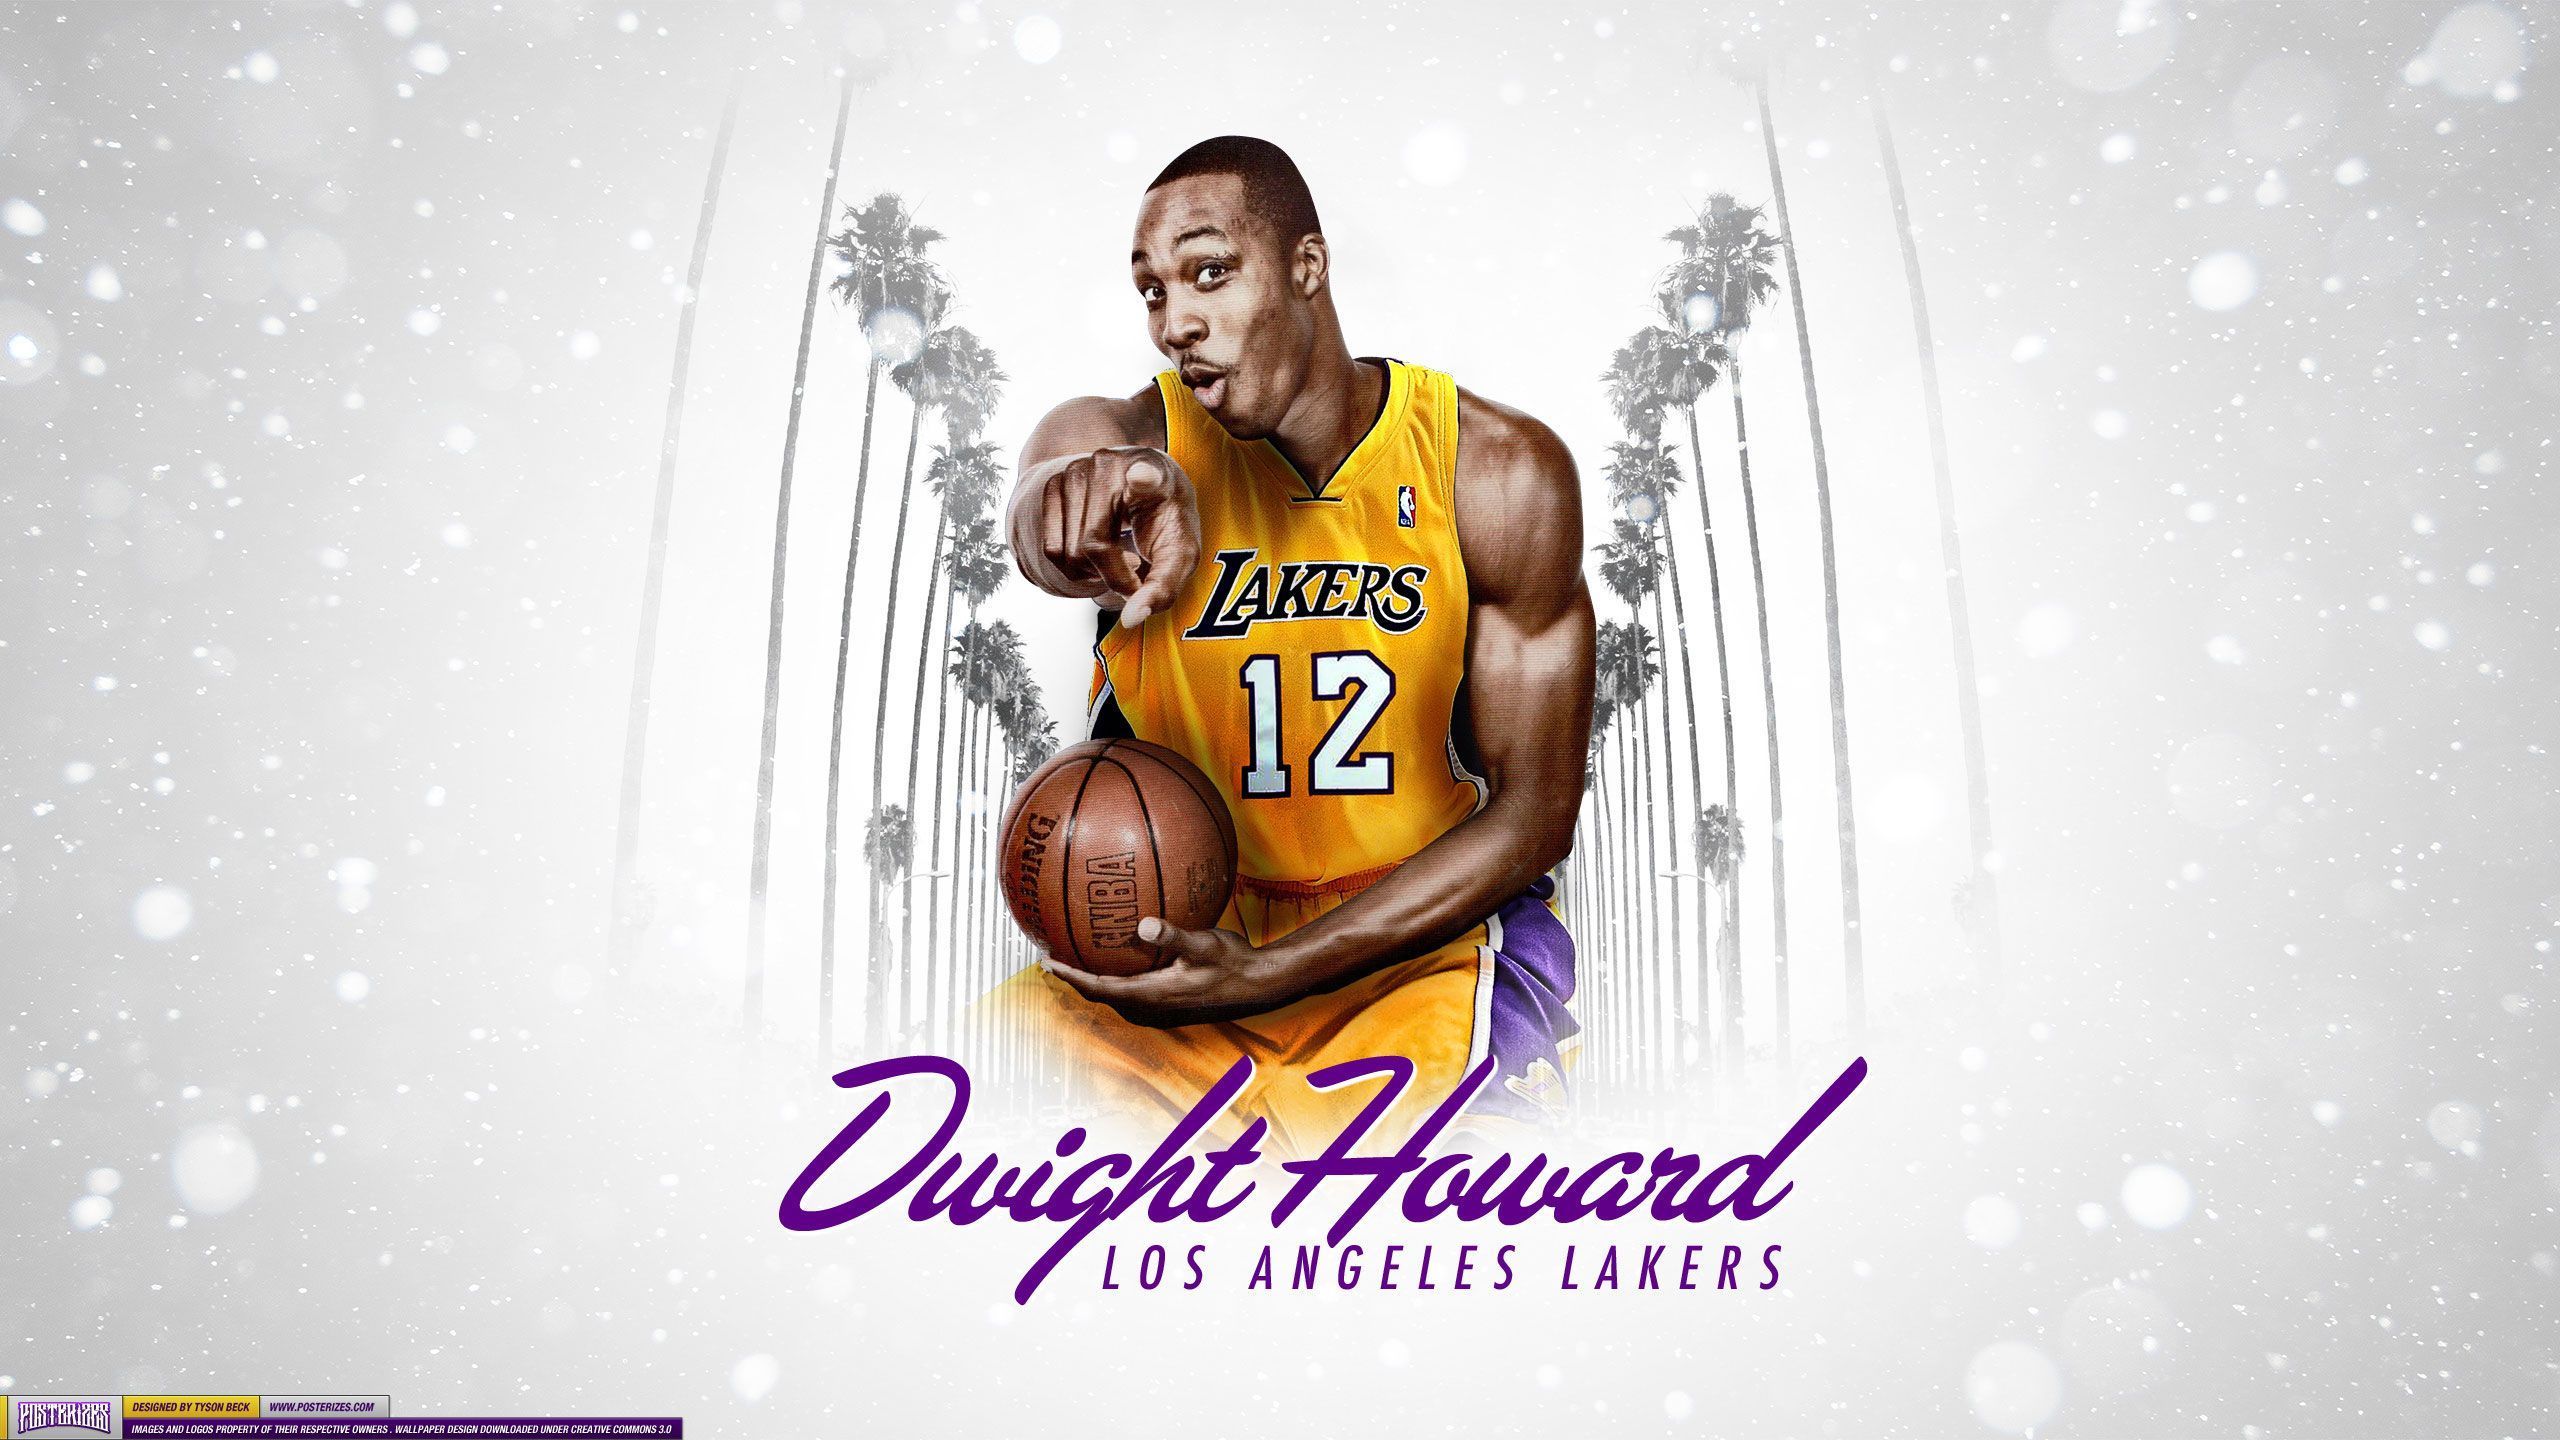 Lakers 4K wallpaper for your desktop or mobile screen free and easy to download